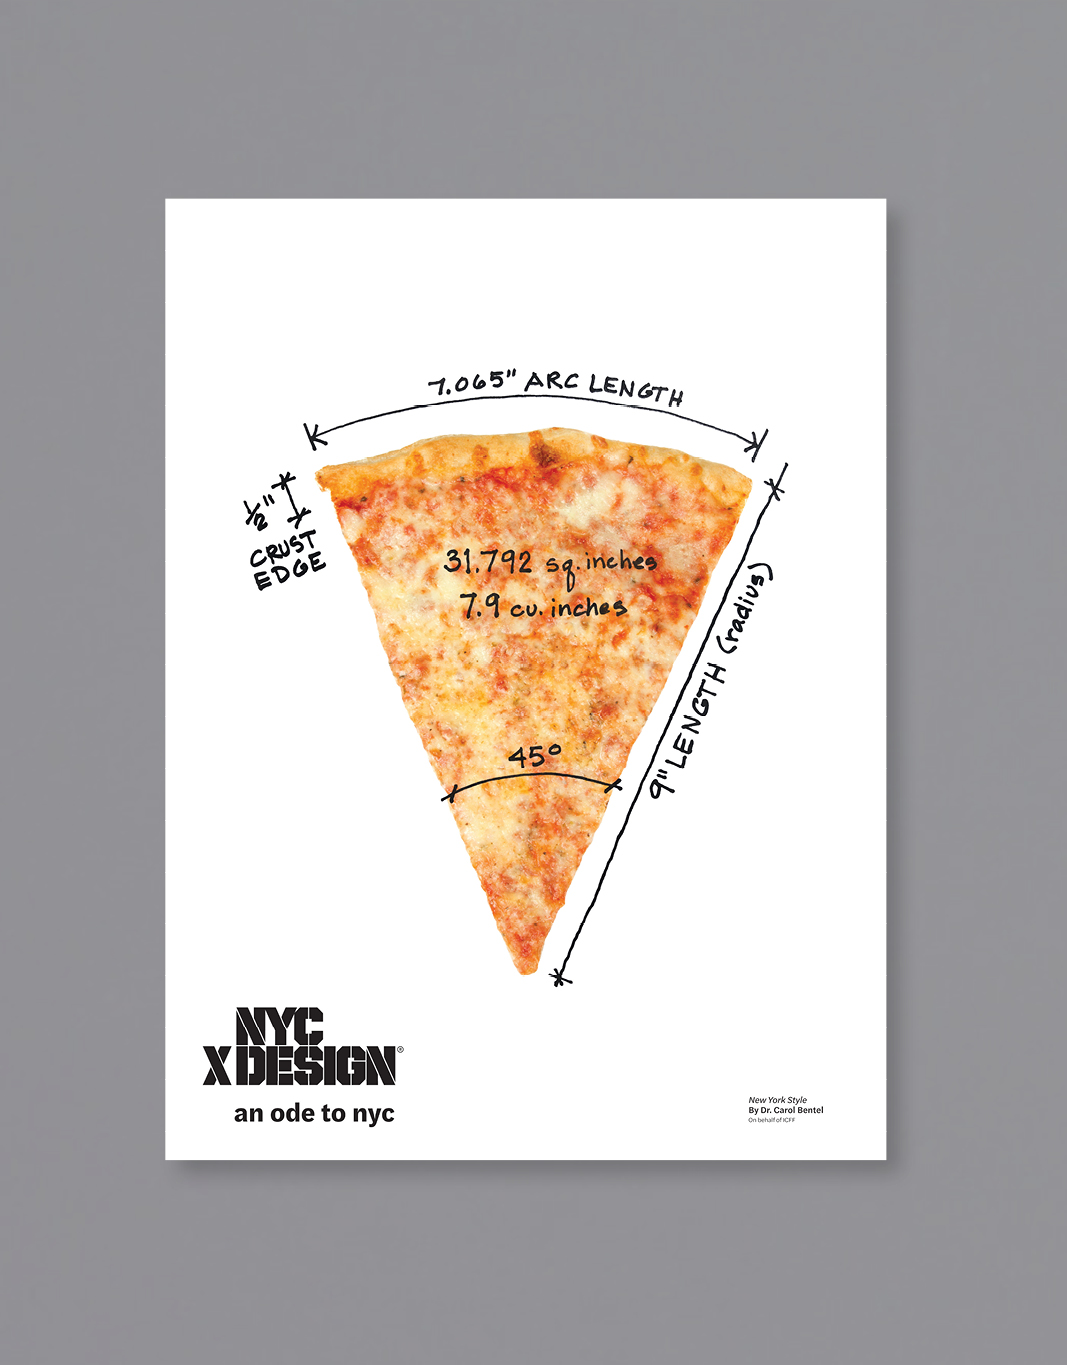 A poster of a slice of pizza with measurements of the size.